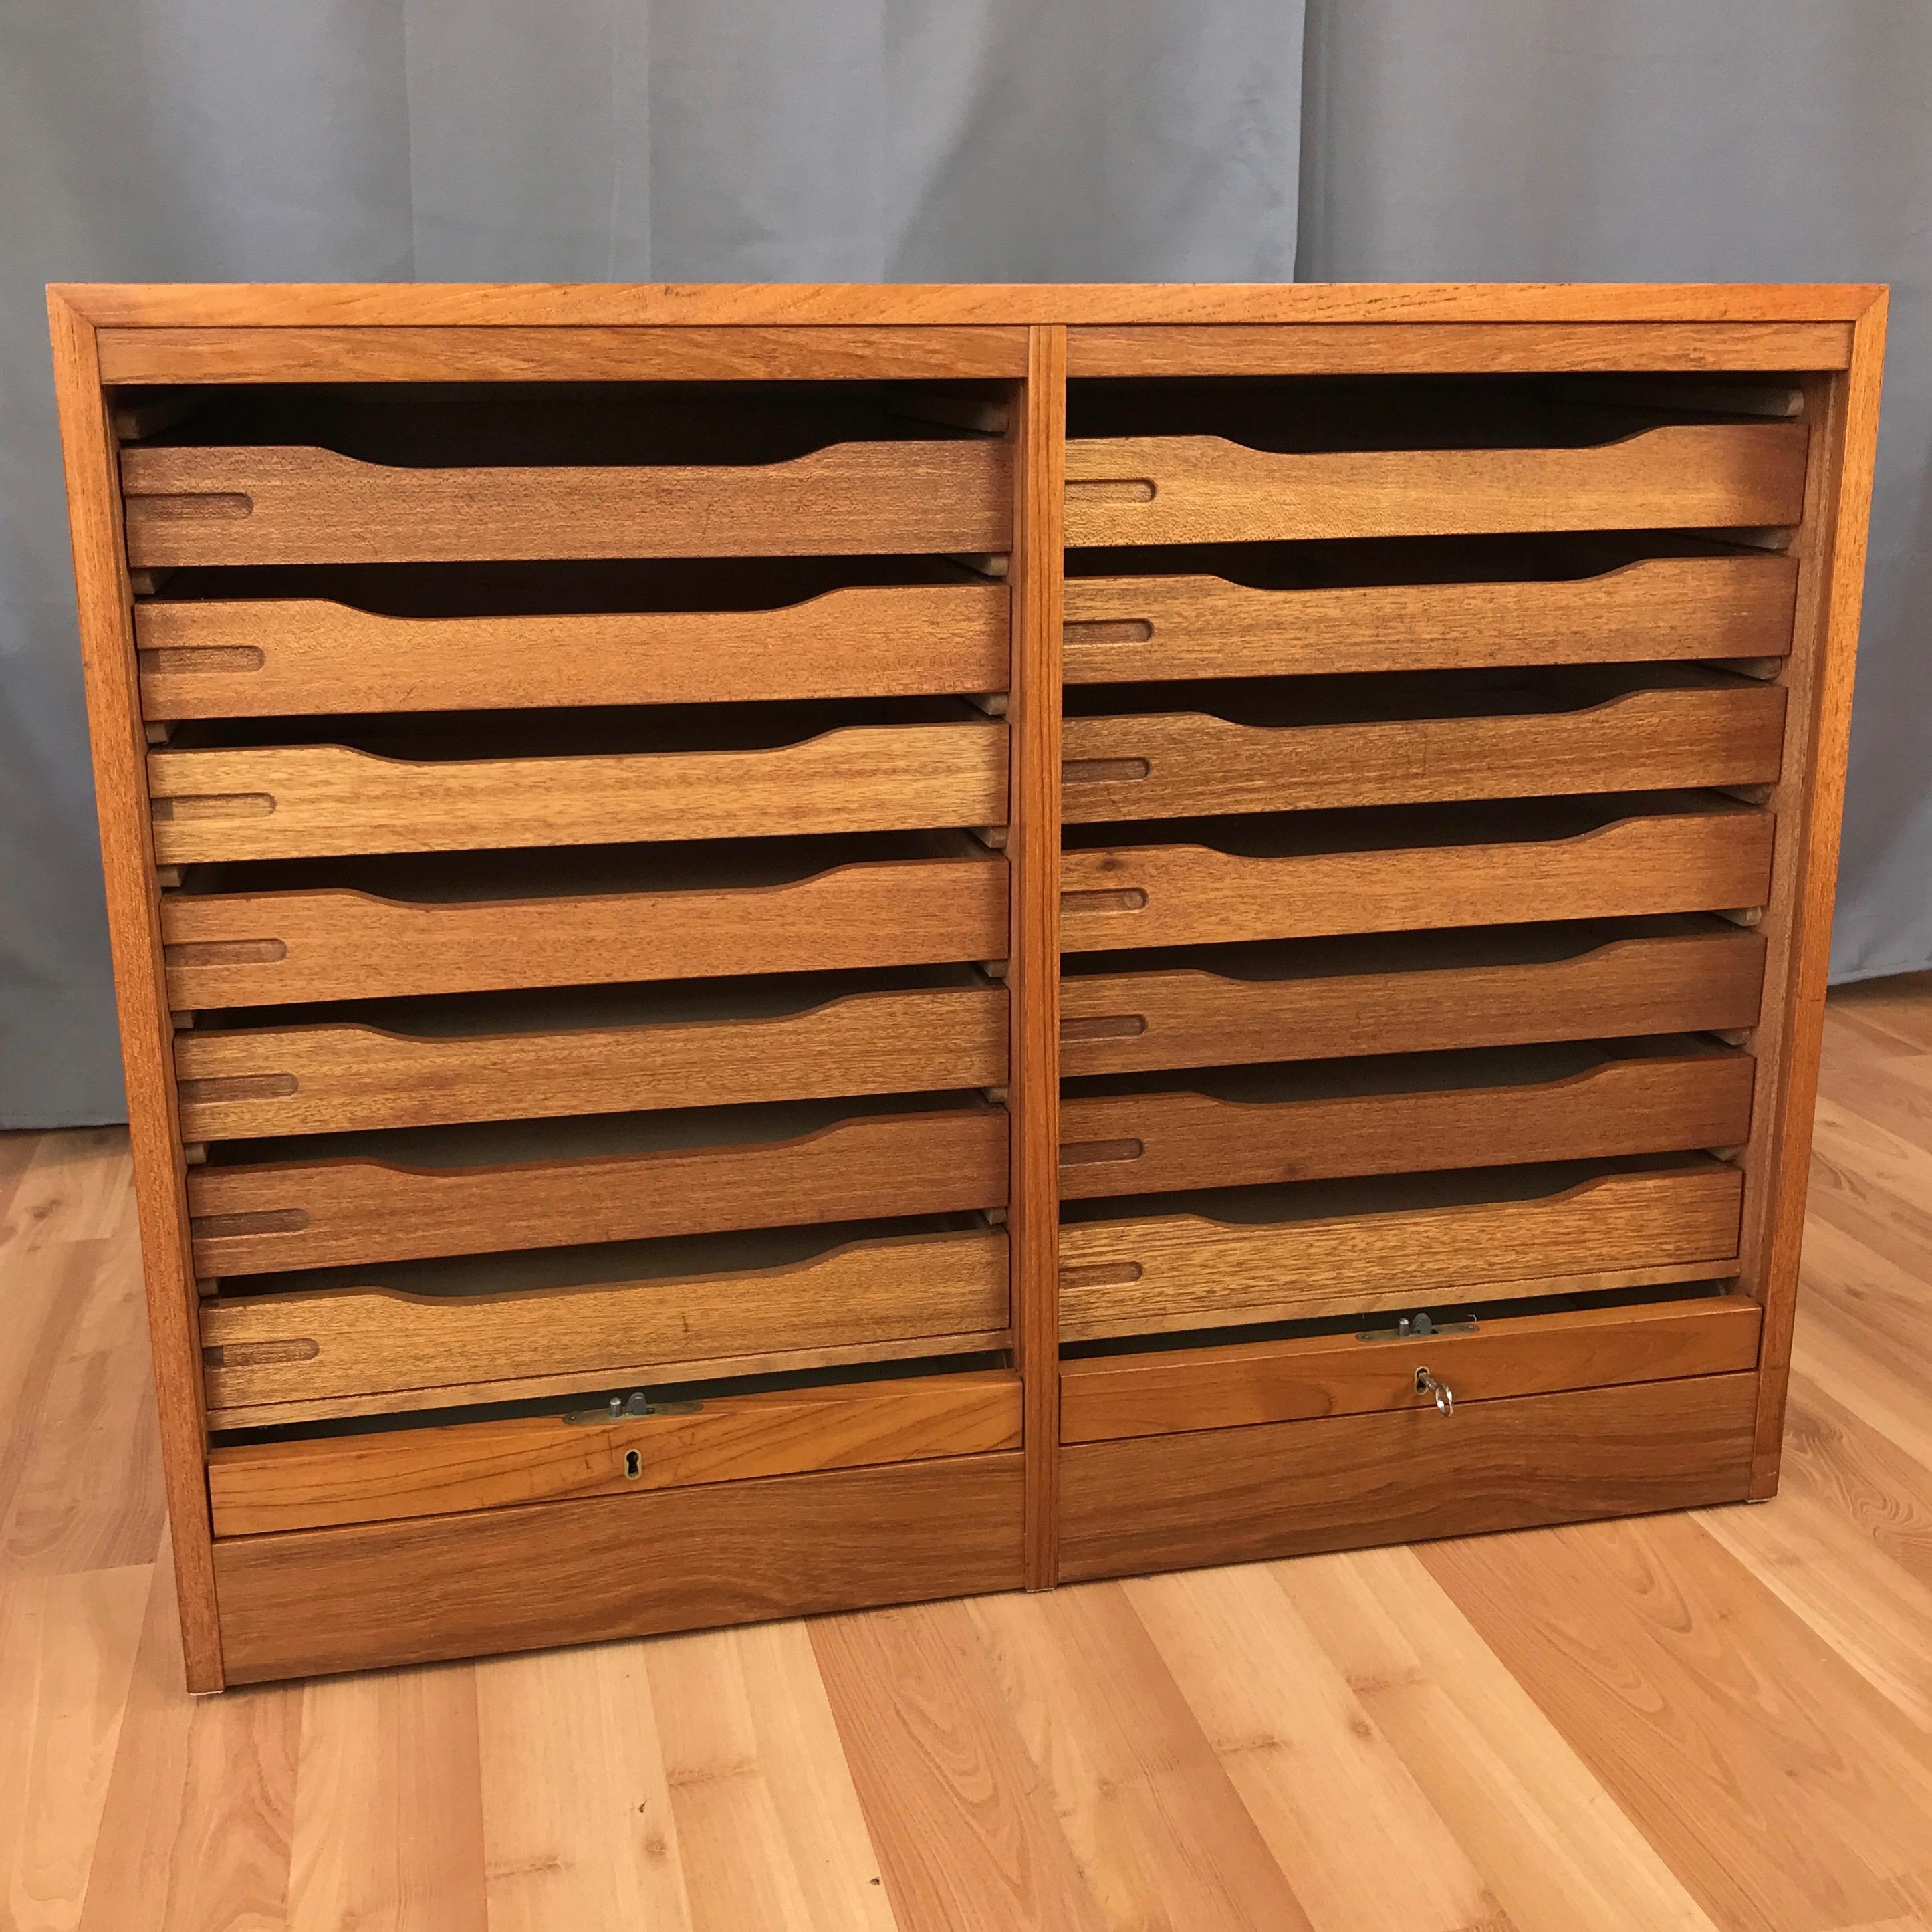 A vintage Danish dual compartment teak file cabinet with locking tambour doors.

Very clean design features smooth front tambour doors that roll down into the base and out of sight. Each side features seven shallow drawers with pine bottoms.